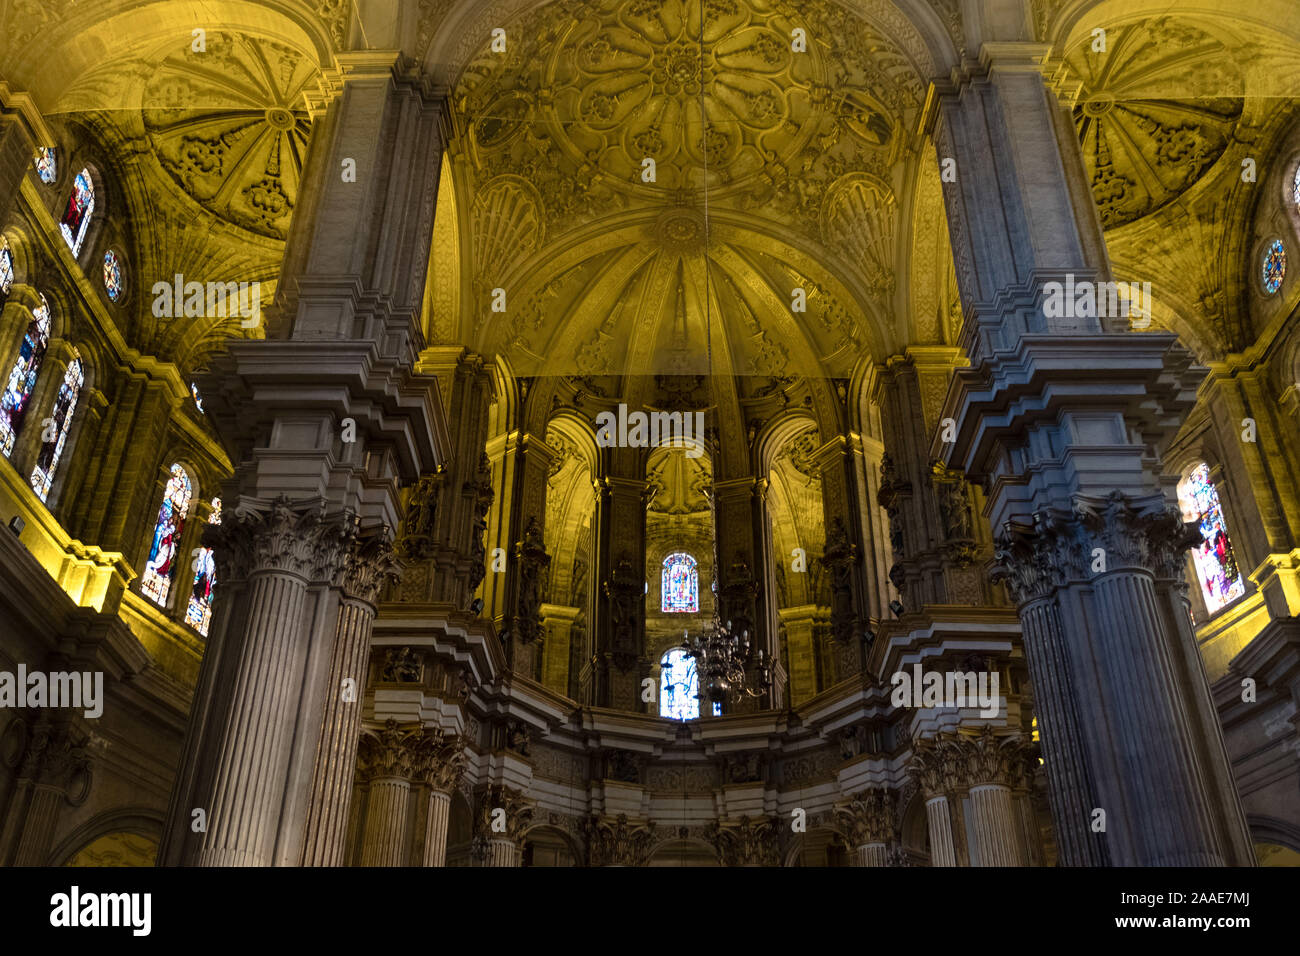 Spectacular Renaissance interior and architecture of Malaga Cathedral Stock Photo